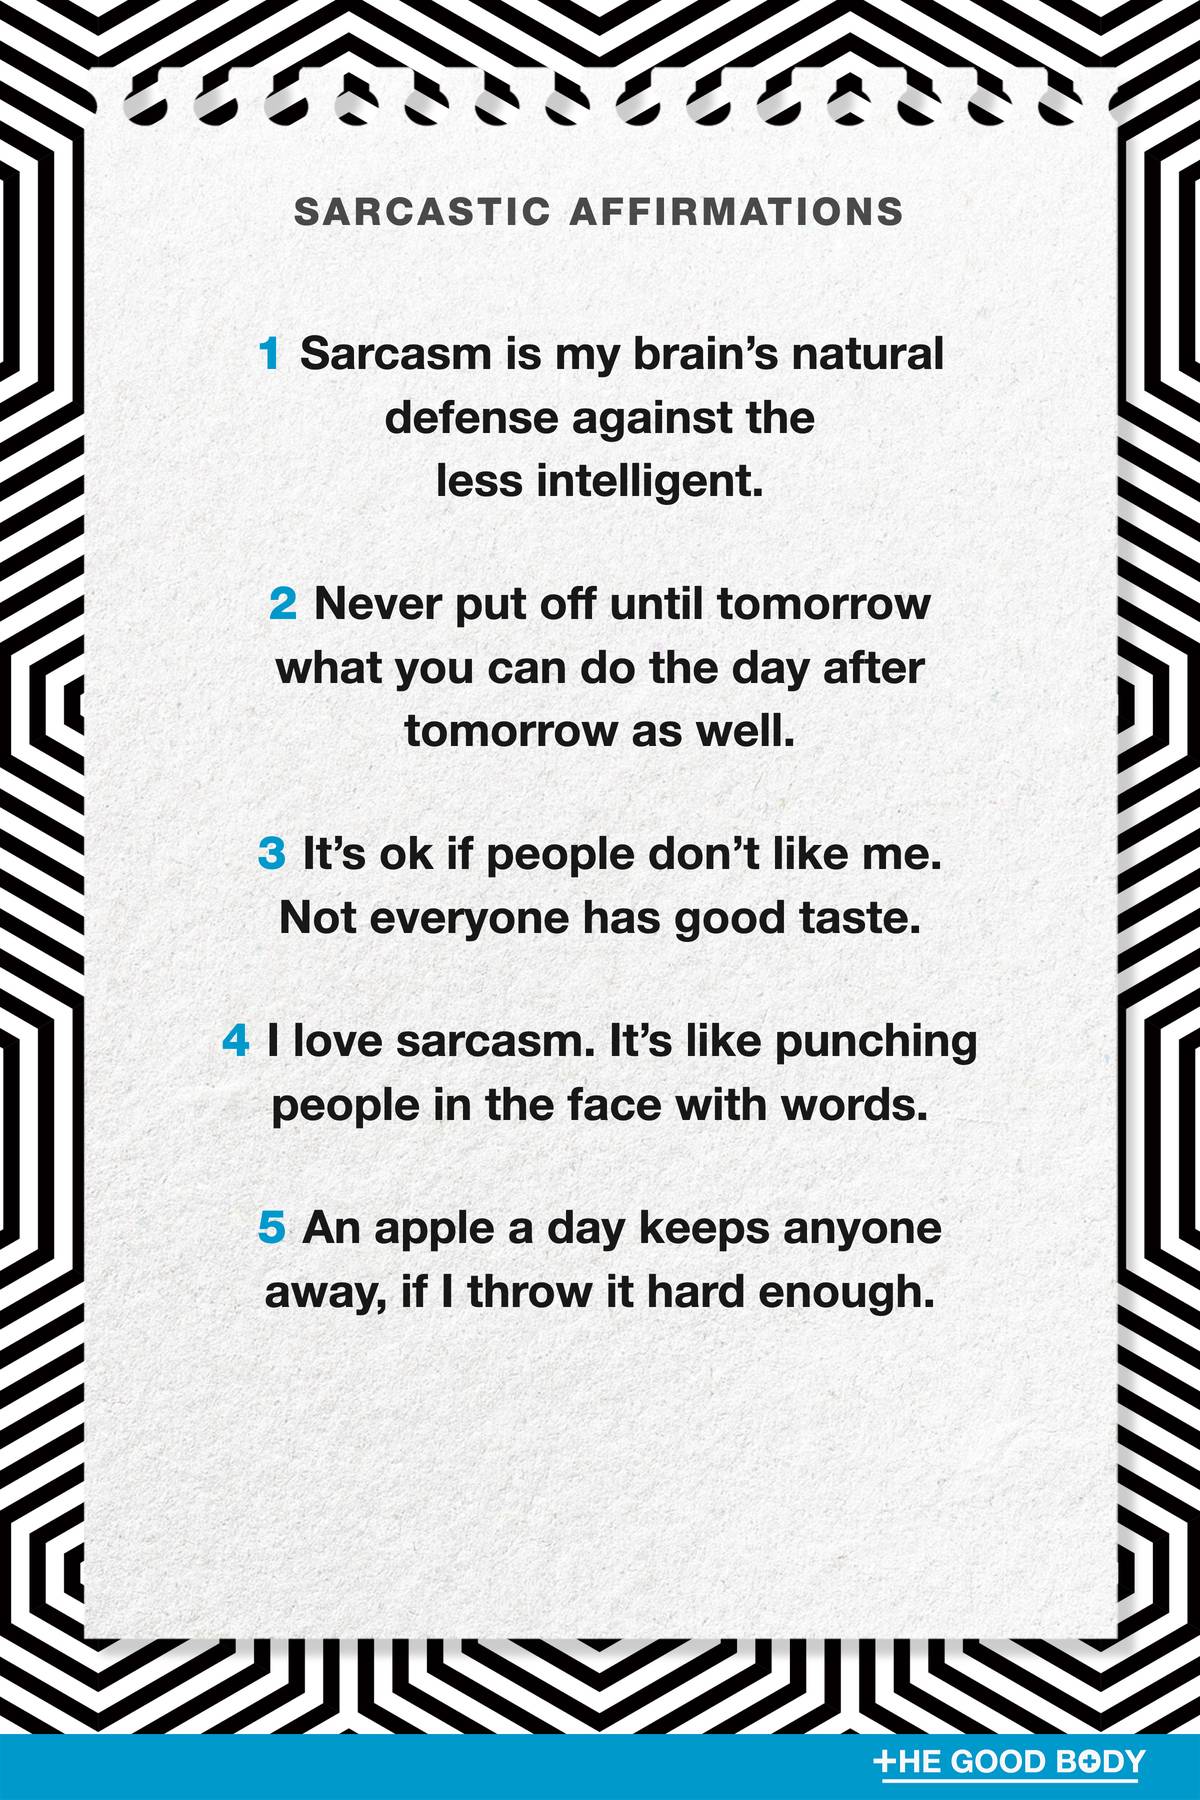 5 Sarcastic Affirmations on Textured Note Paper with Optical Illusion Background